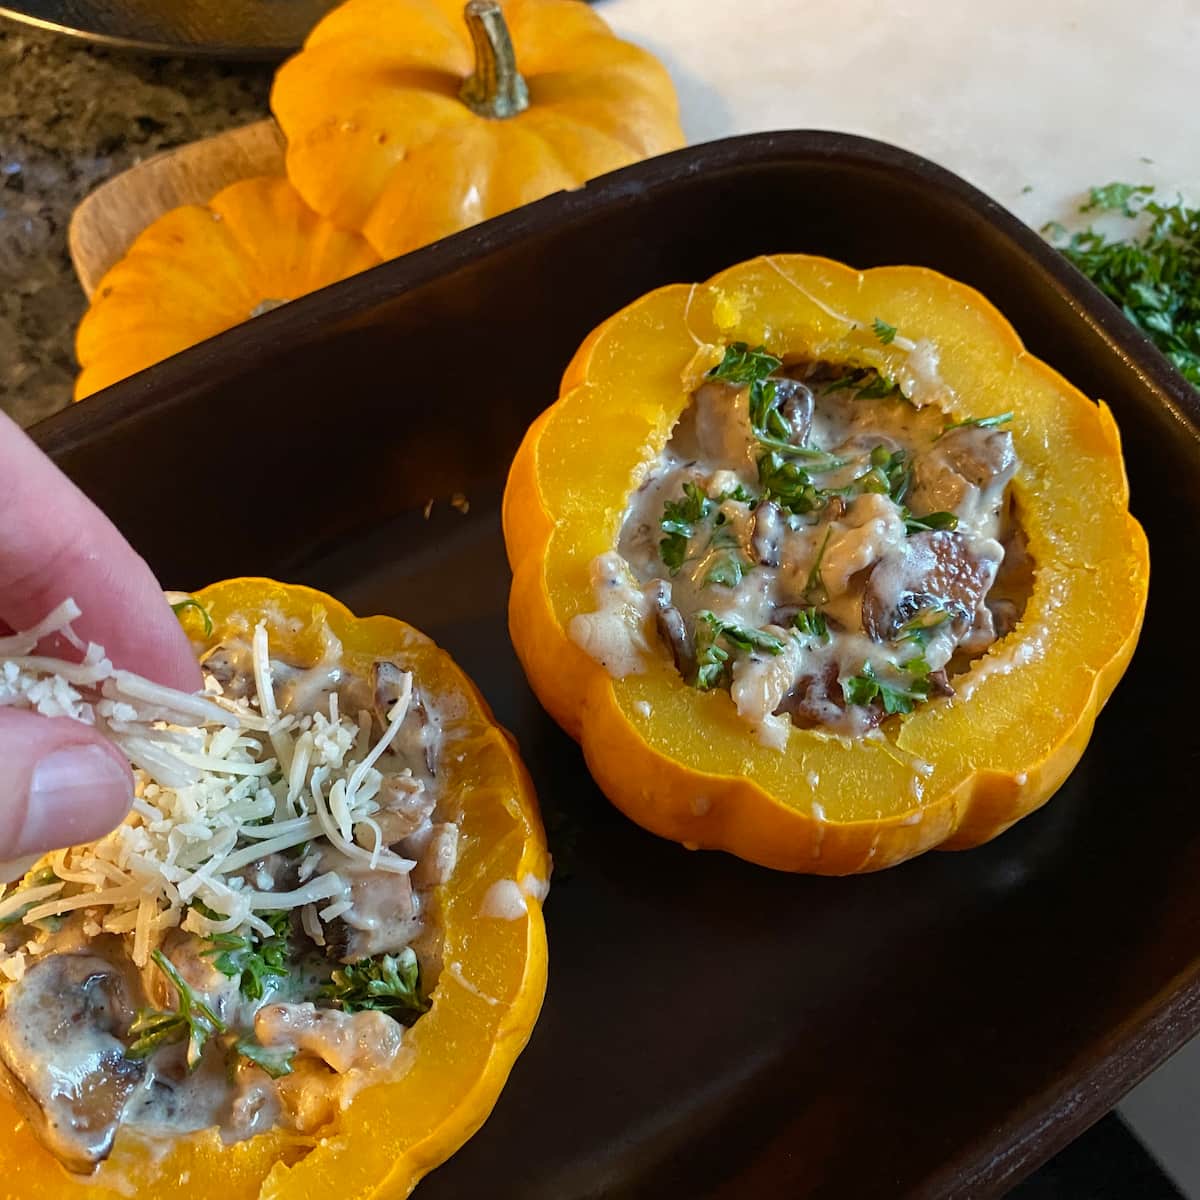 stuffing mini pumpkins with mushrooms and cheese